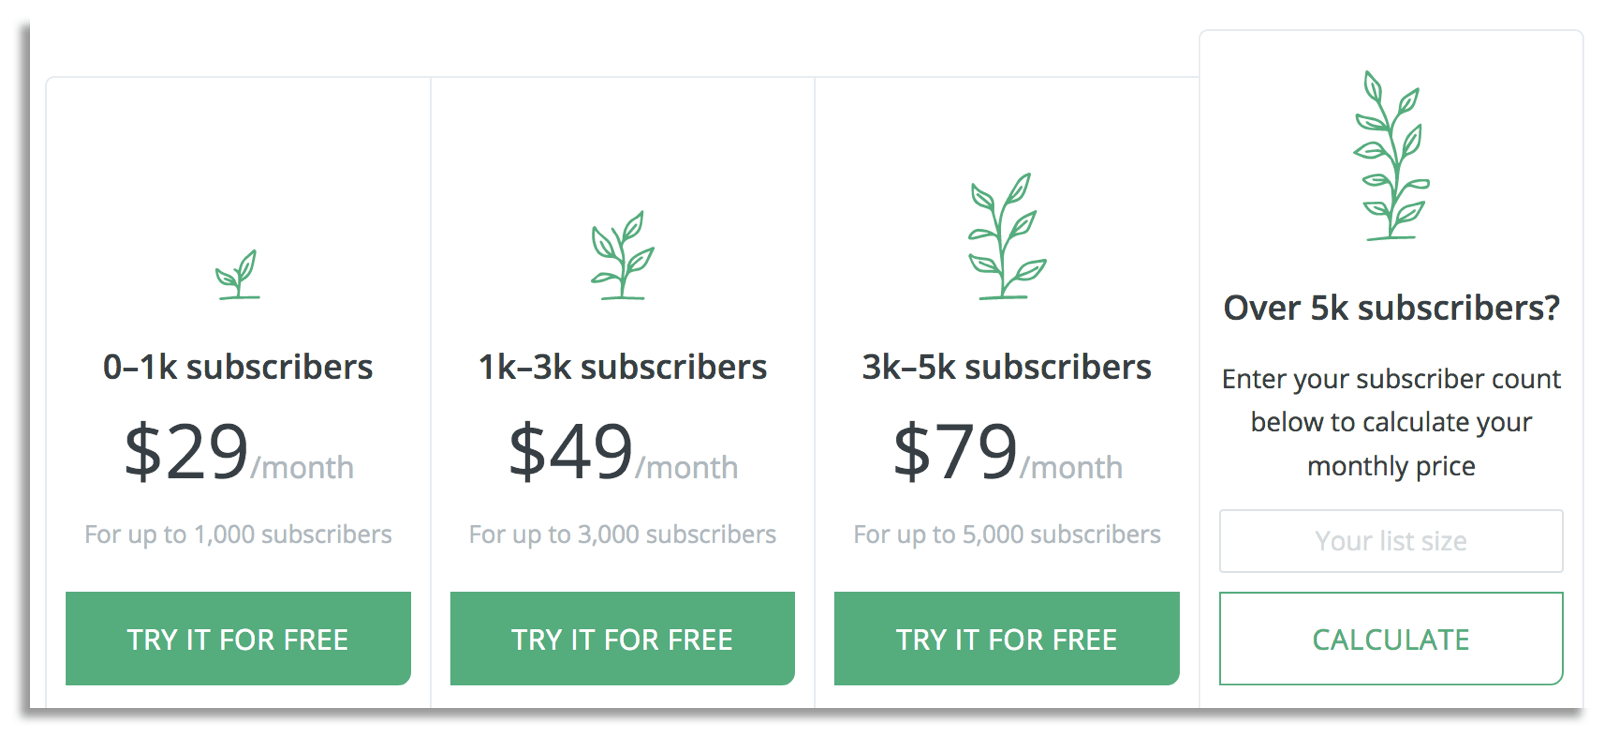 ConvertKit Pricing - How much is ConvertKit?